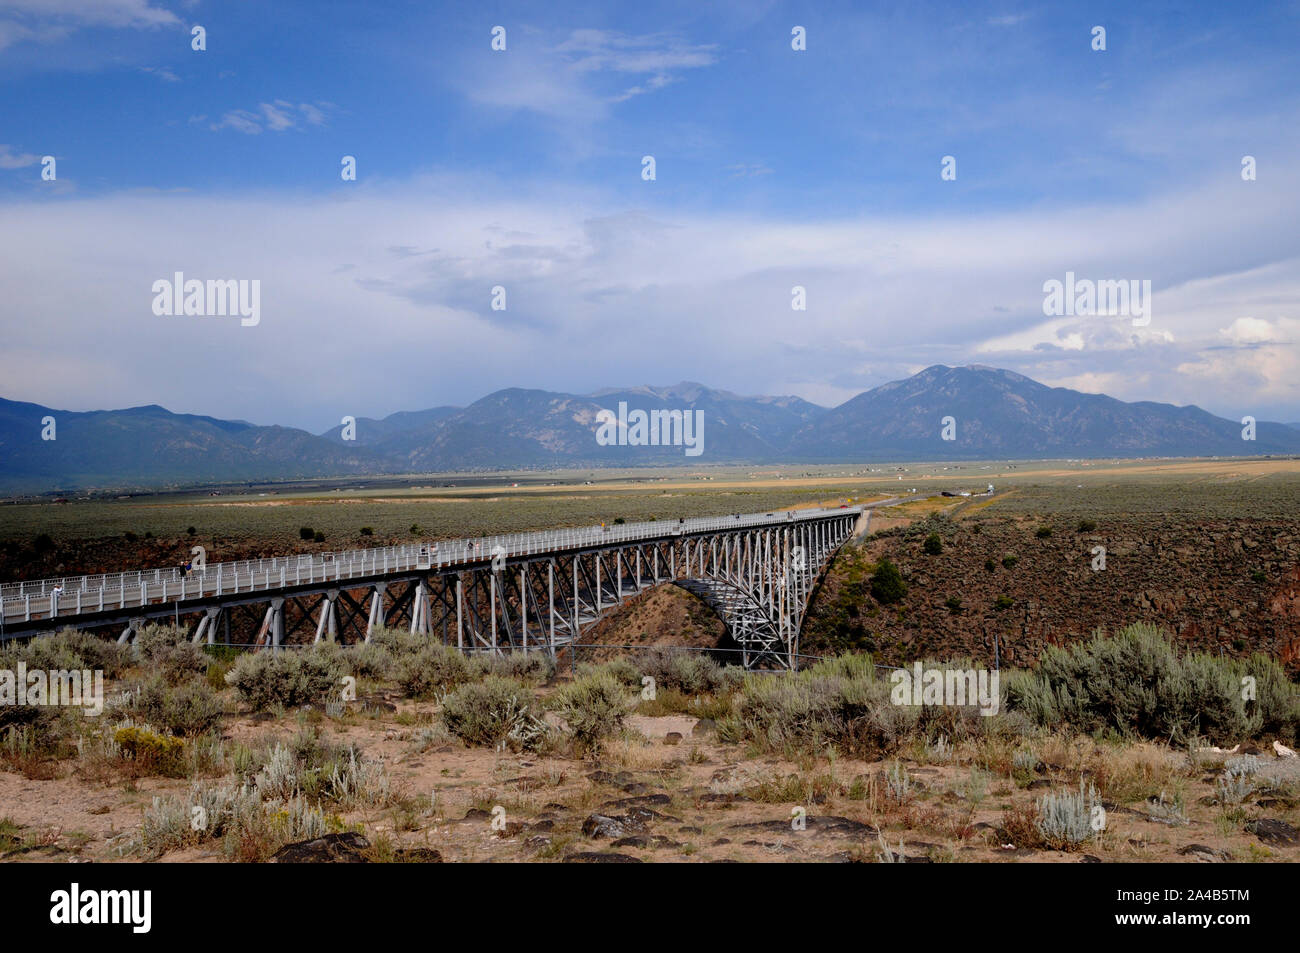 The Rio Grande Gorge bridge, sometimes called the Taos Gorge, on US64 just outside Taos, New Mexico. Stock Photo